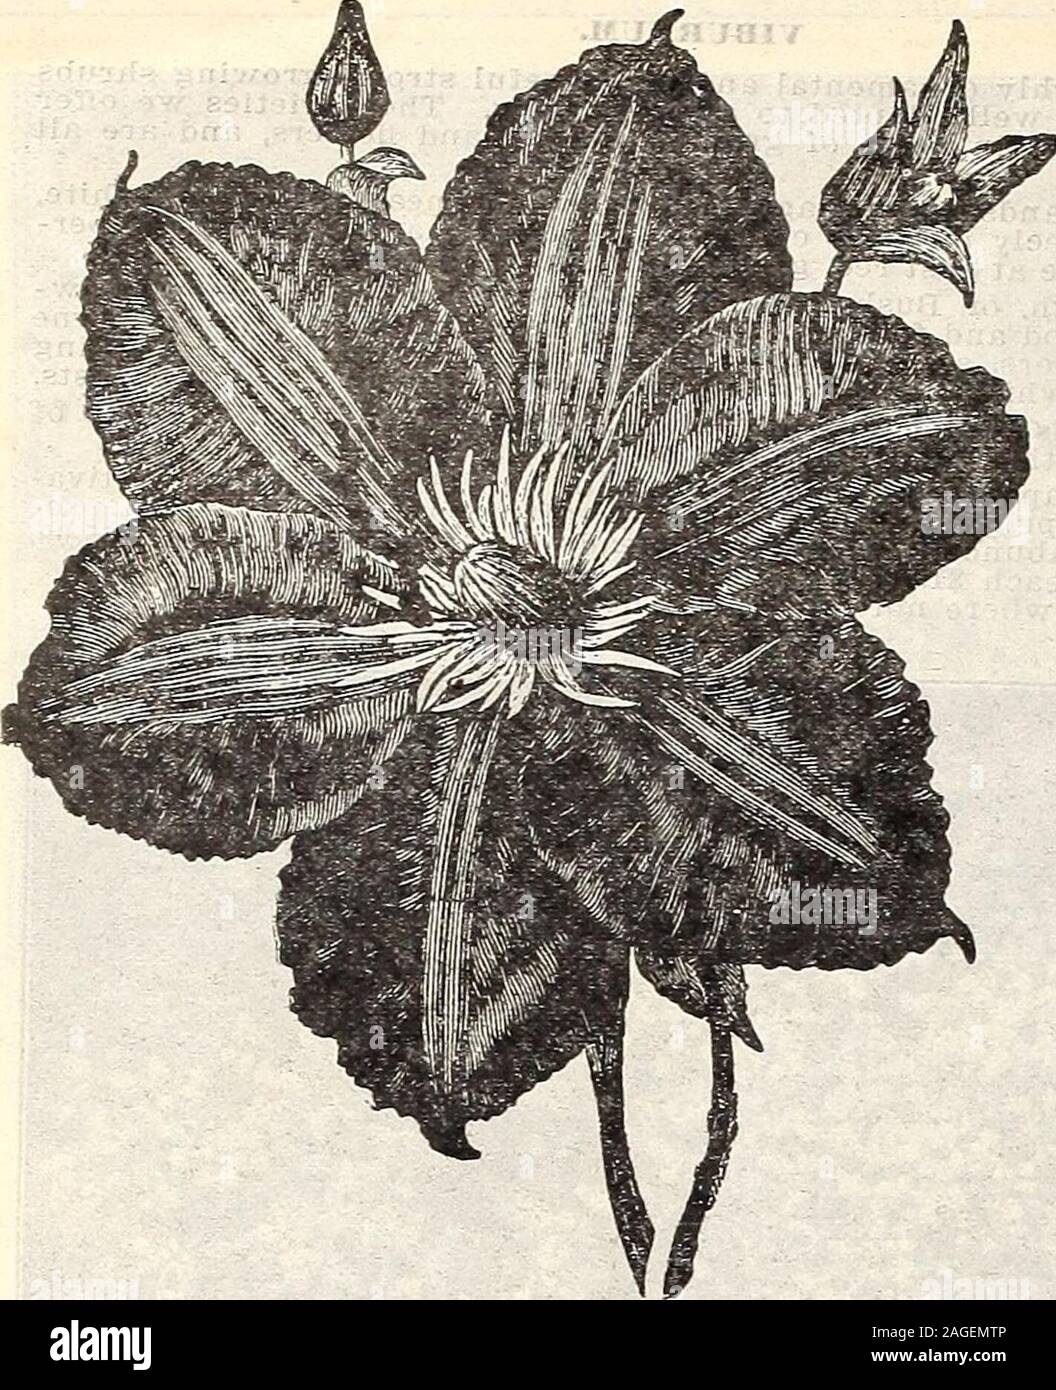 . Farm and garden annual : spring 1907. WBIGBLA ROSEA VAB. 120 CURRIE BROTHERS COMPANY, MILWAUKEE, WIS.. CLEMATIS. For covering large spaces quickly the Clematis stands unrivaled. They may be planted at any time. The ground should be dug- deeply and well manured. A little attention to this will amply repay you for your trouble, as the plant will grow more vigorously and give a greater quantity of flowers. C. Coceinea—Scarlet; the flower looks more like a bud than ablossom and forms a striking contrast when grown side byside with other varieties. Price, each 20c: ner doz $2.00 C. Crispa—Lavende Stock Photo